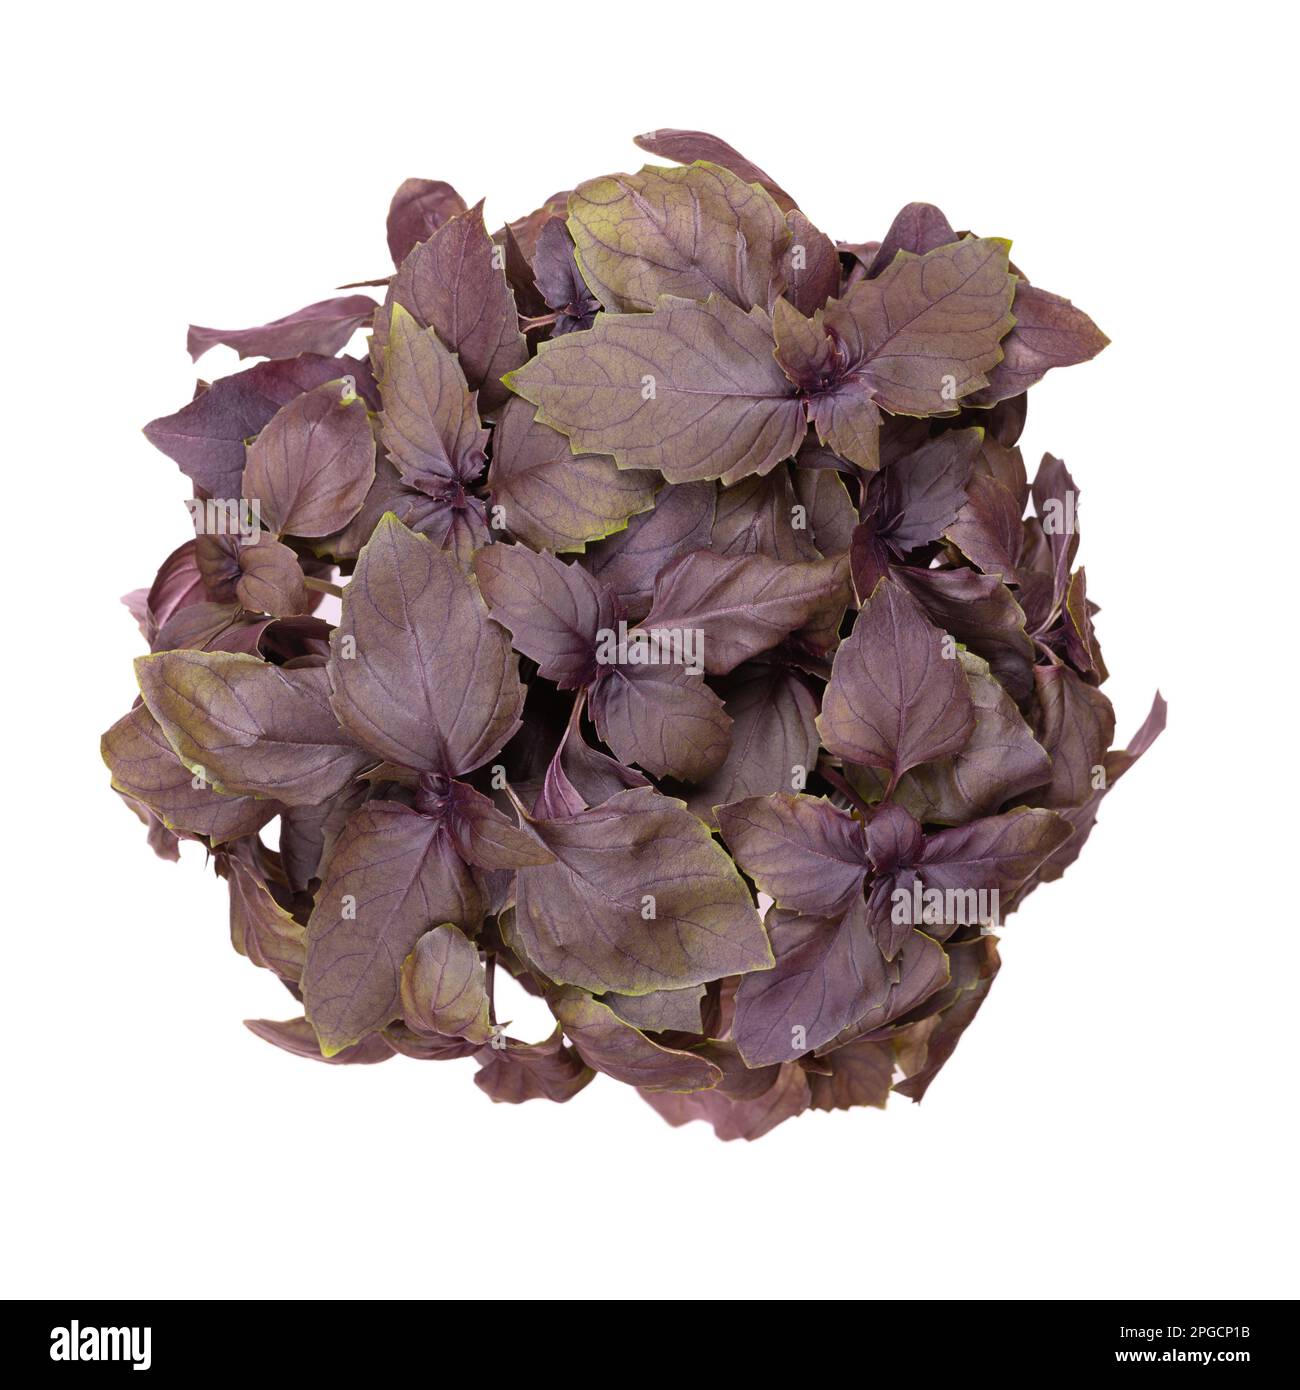 Red rubin basil from above, isolated over white. Fresh Ocimum basilicum Purpurascens, a variation of sweet basil, with unusual reddish-purple leaves. Stock Photo